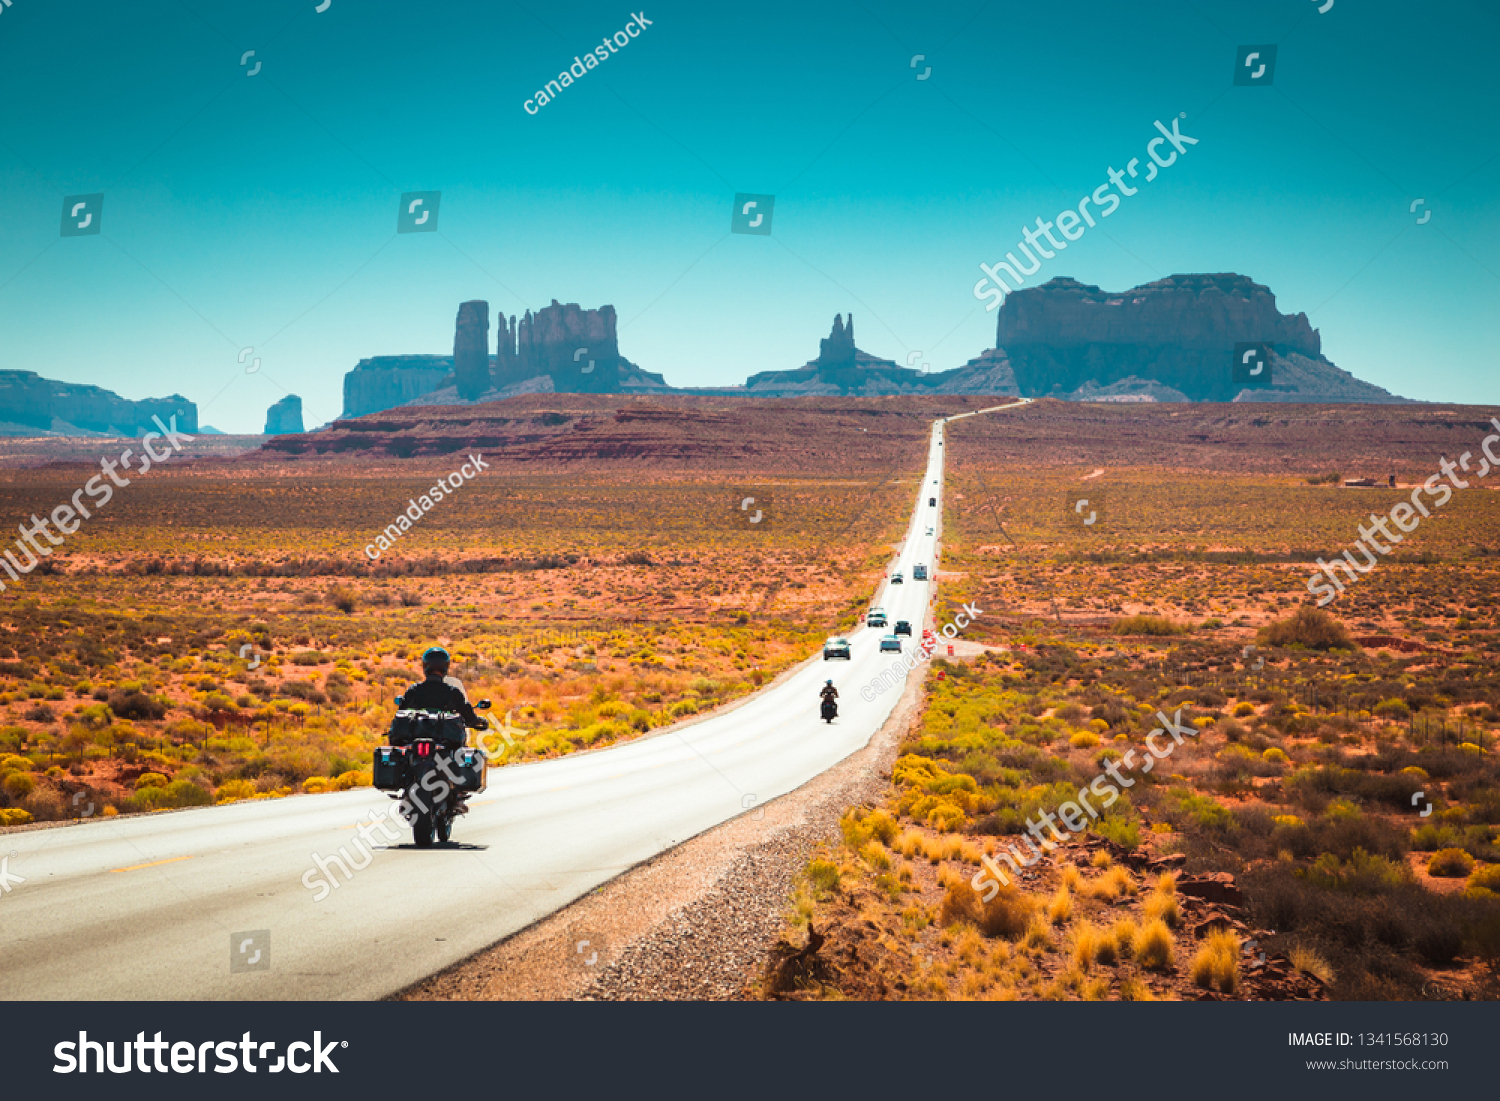 Classic panorama view of motorcyclist on historic U.S. Route 163 running through famous Monument Valley in beautiful golden evening light at sunset in summer, Utah, USA #1341568130